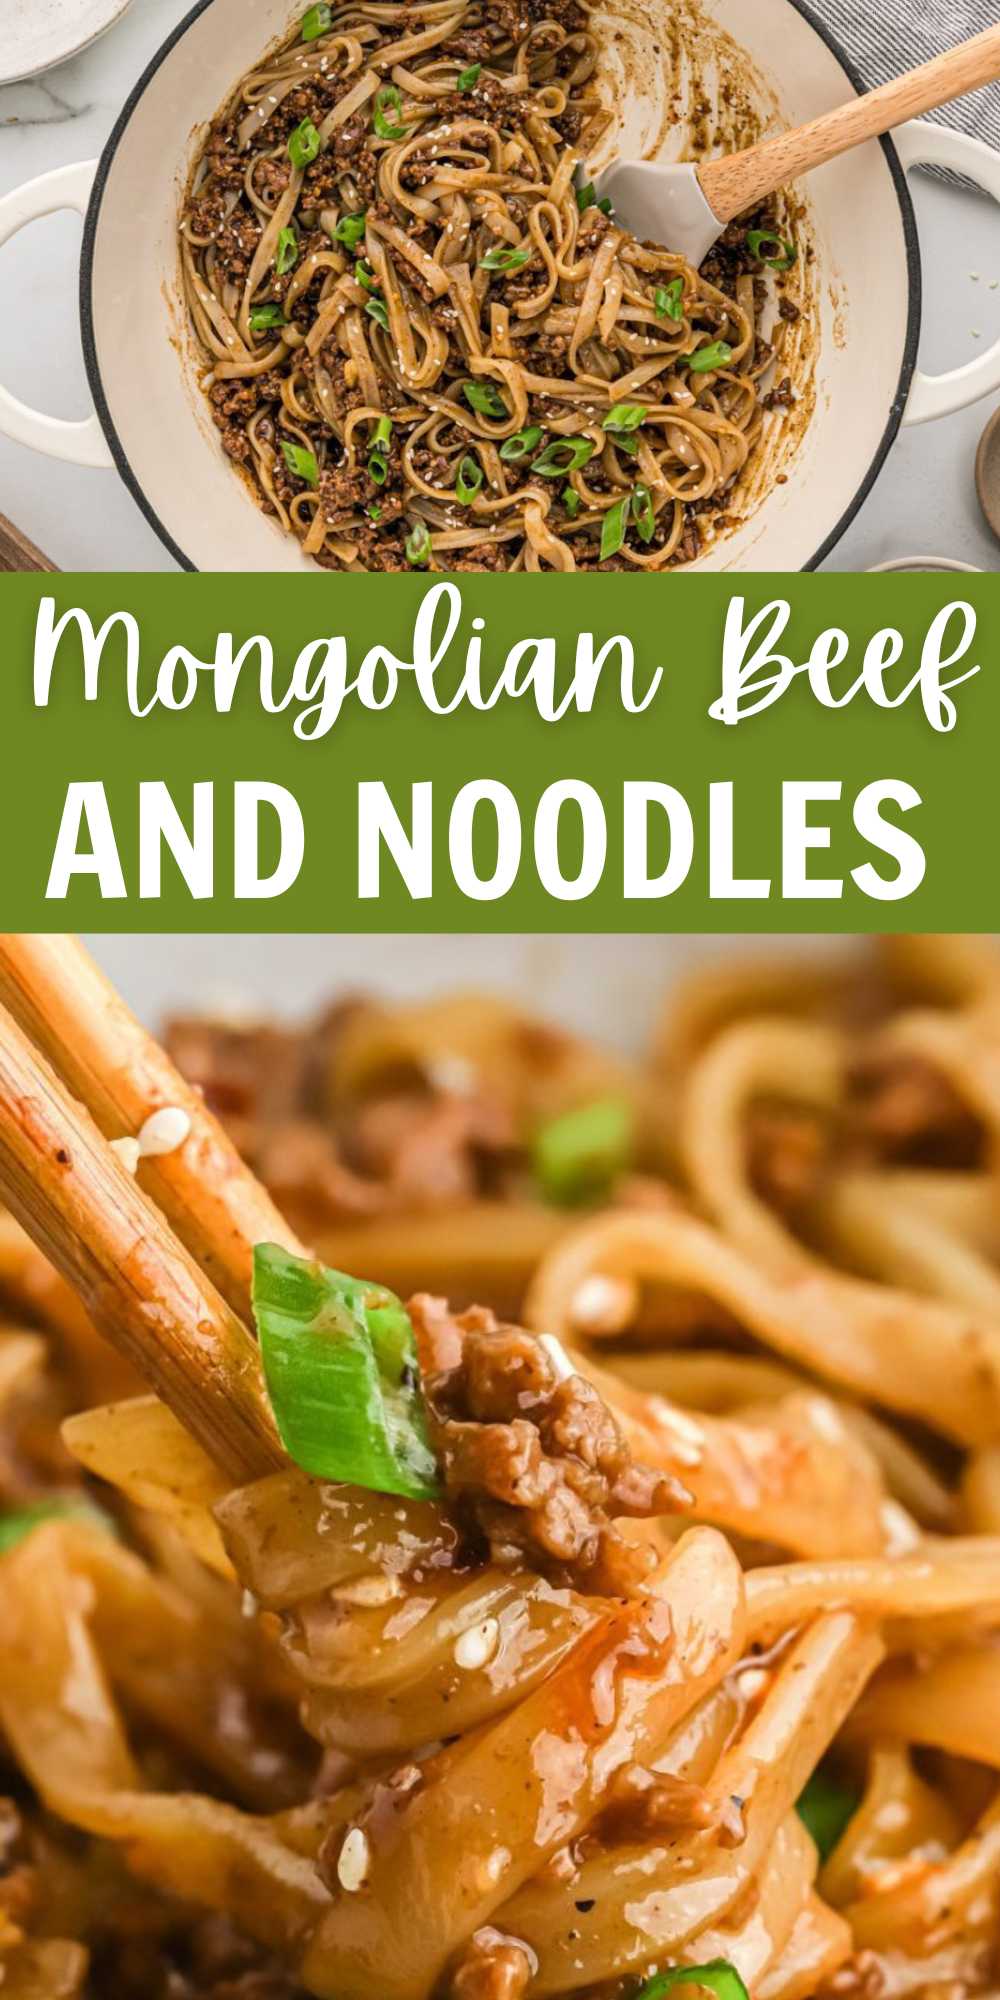 Mongolian Beef and Noodles combines the flavors of beef, rice noodles and a delicious Asian inspired sauce. Delicious and easy to make. We love skillet recipes because of how easy they are to make. This Asian inspired dish is restaurant quality that can easily be made at home. #eatingonadime #mongolianbeefandnoodles #mongolianbeef #noodles